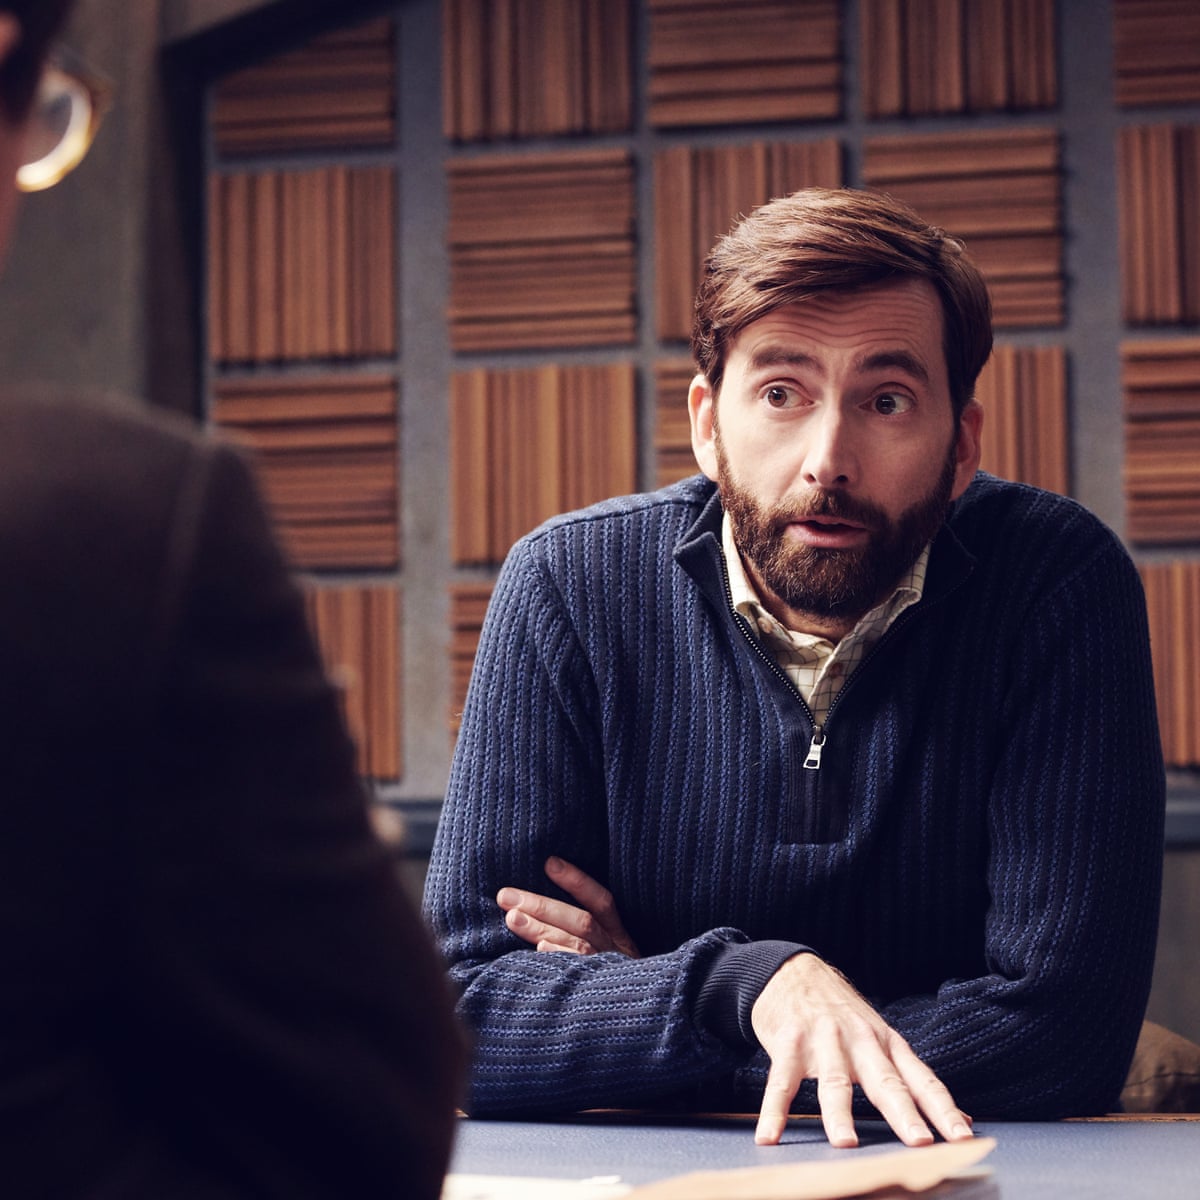 A bearded man wearing a blue sweater sitting at the table 